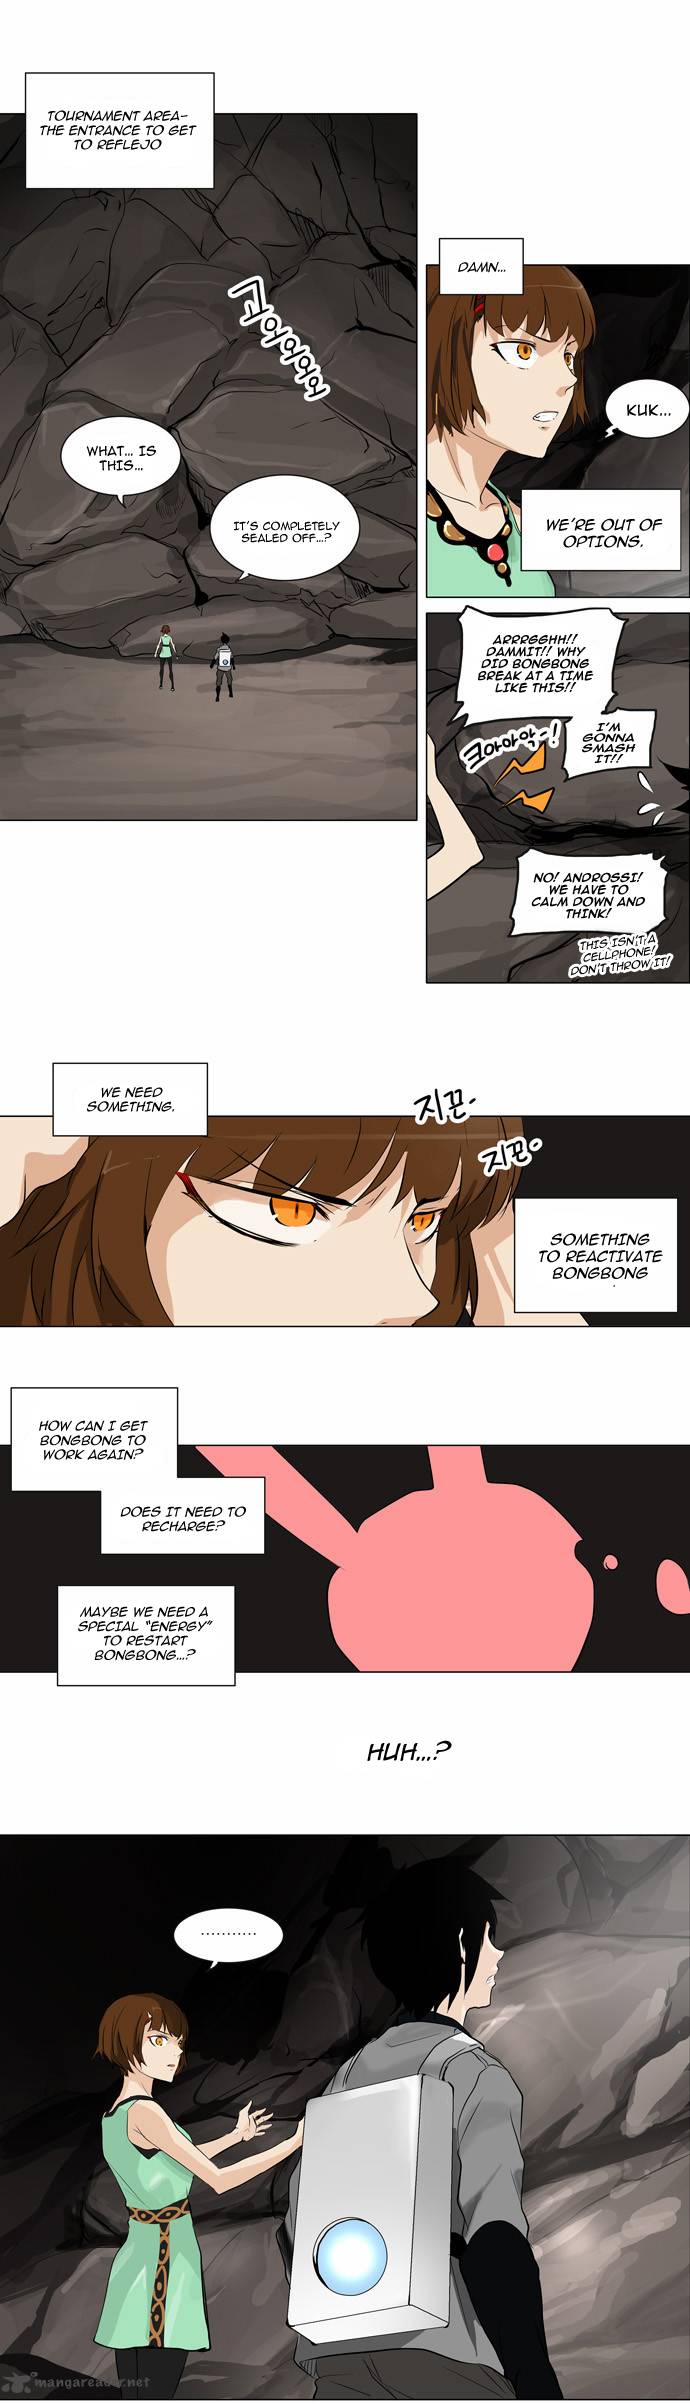 Tower Of God 186 17